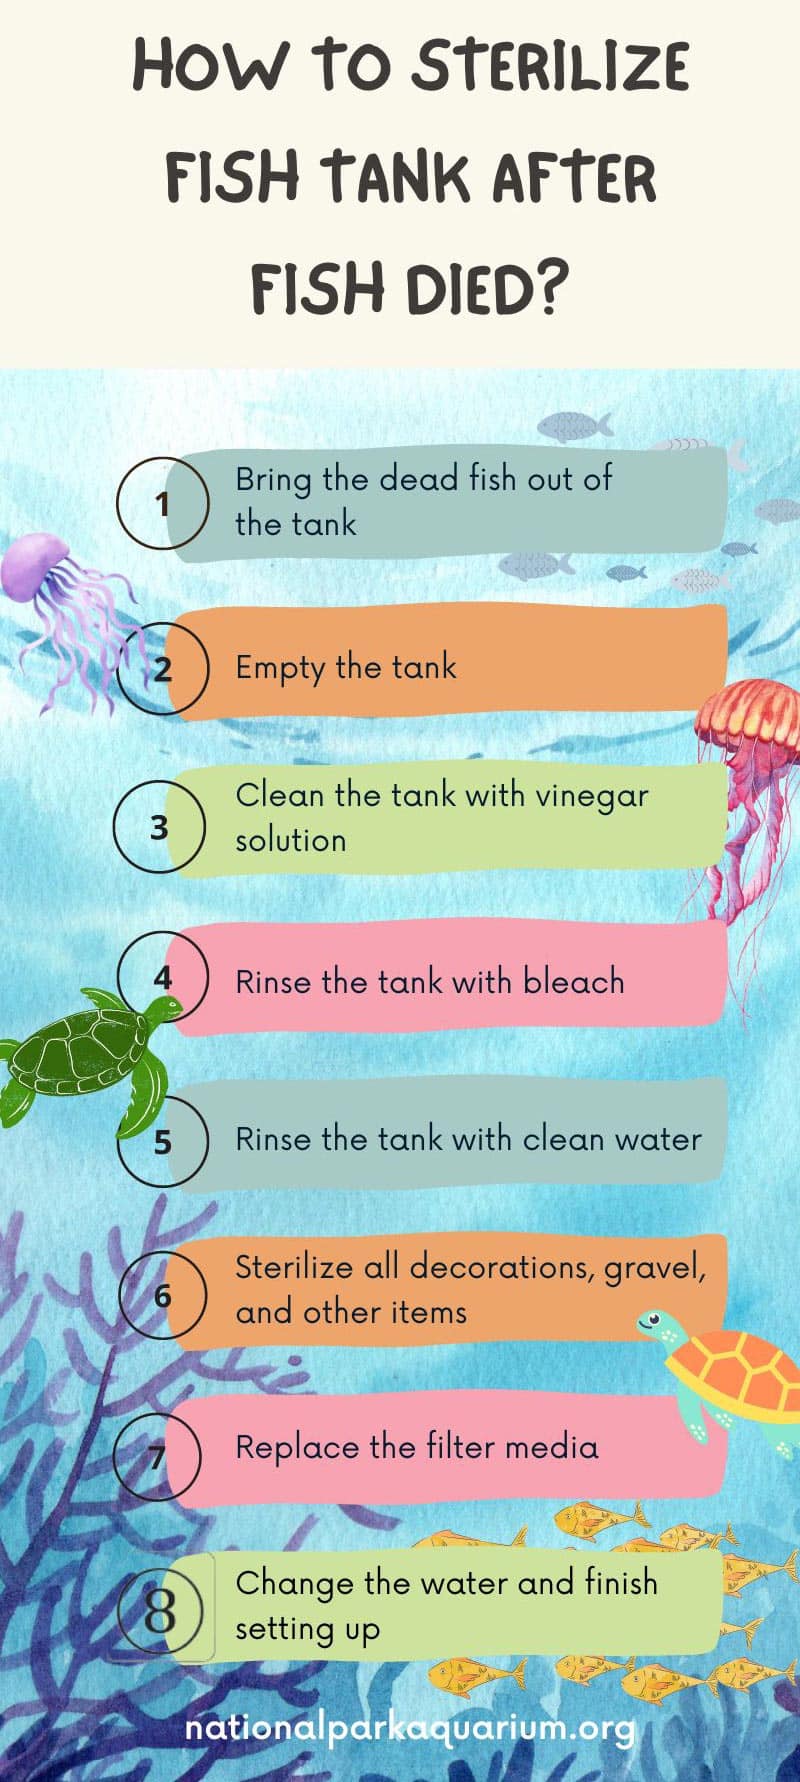 how to sterilize fish tank after fish died